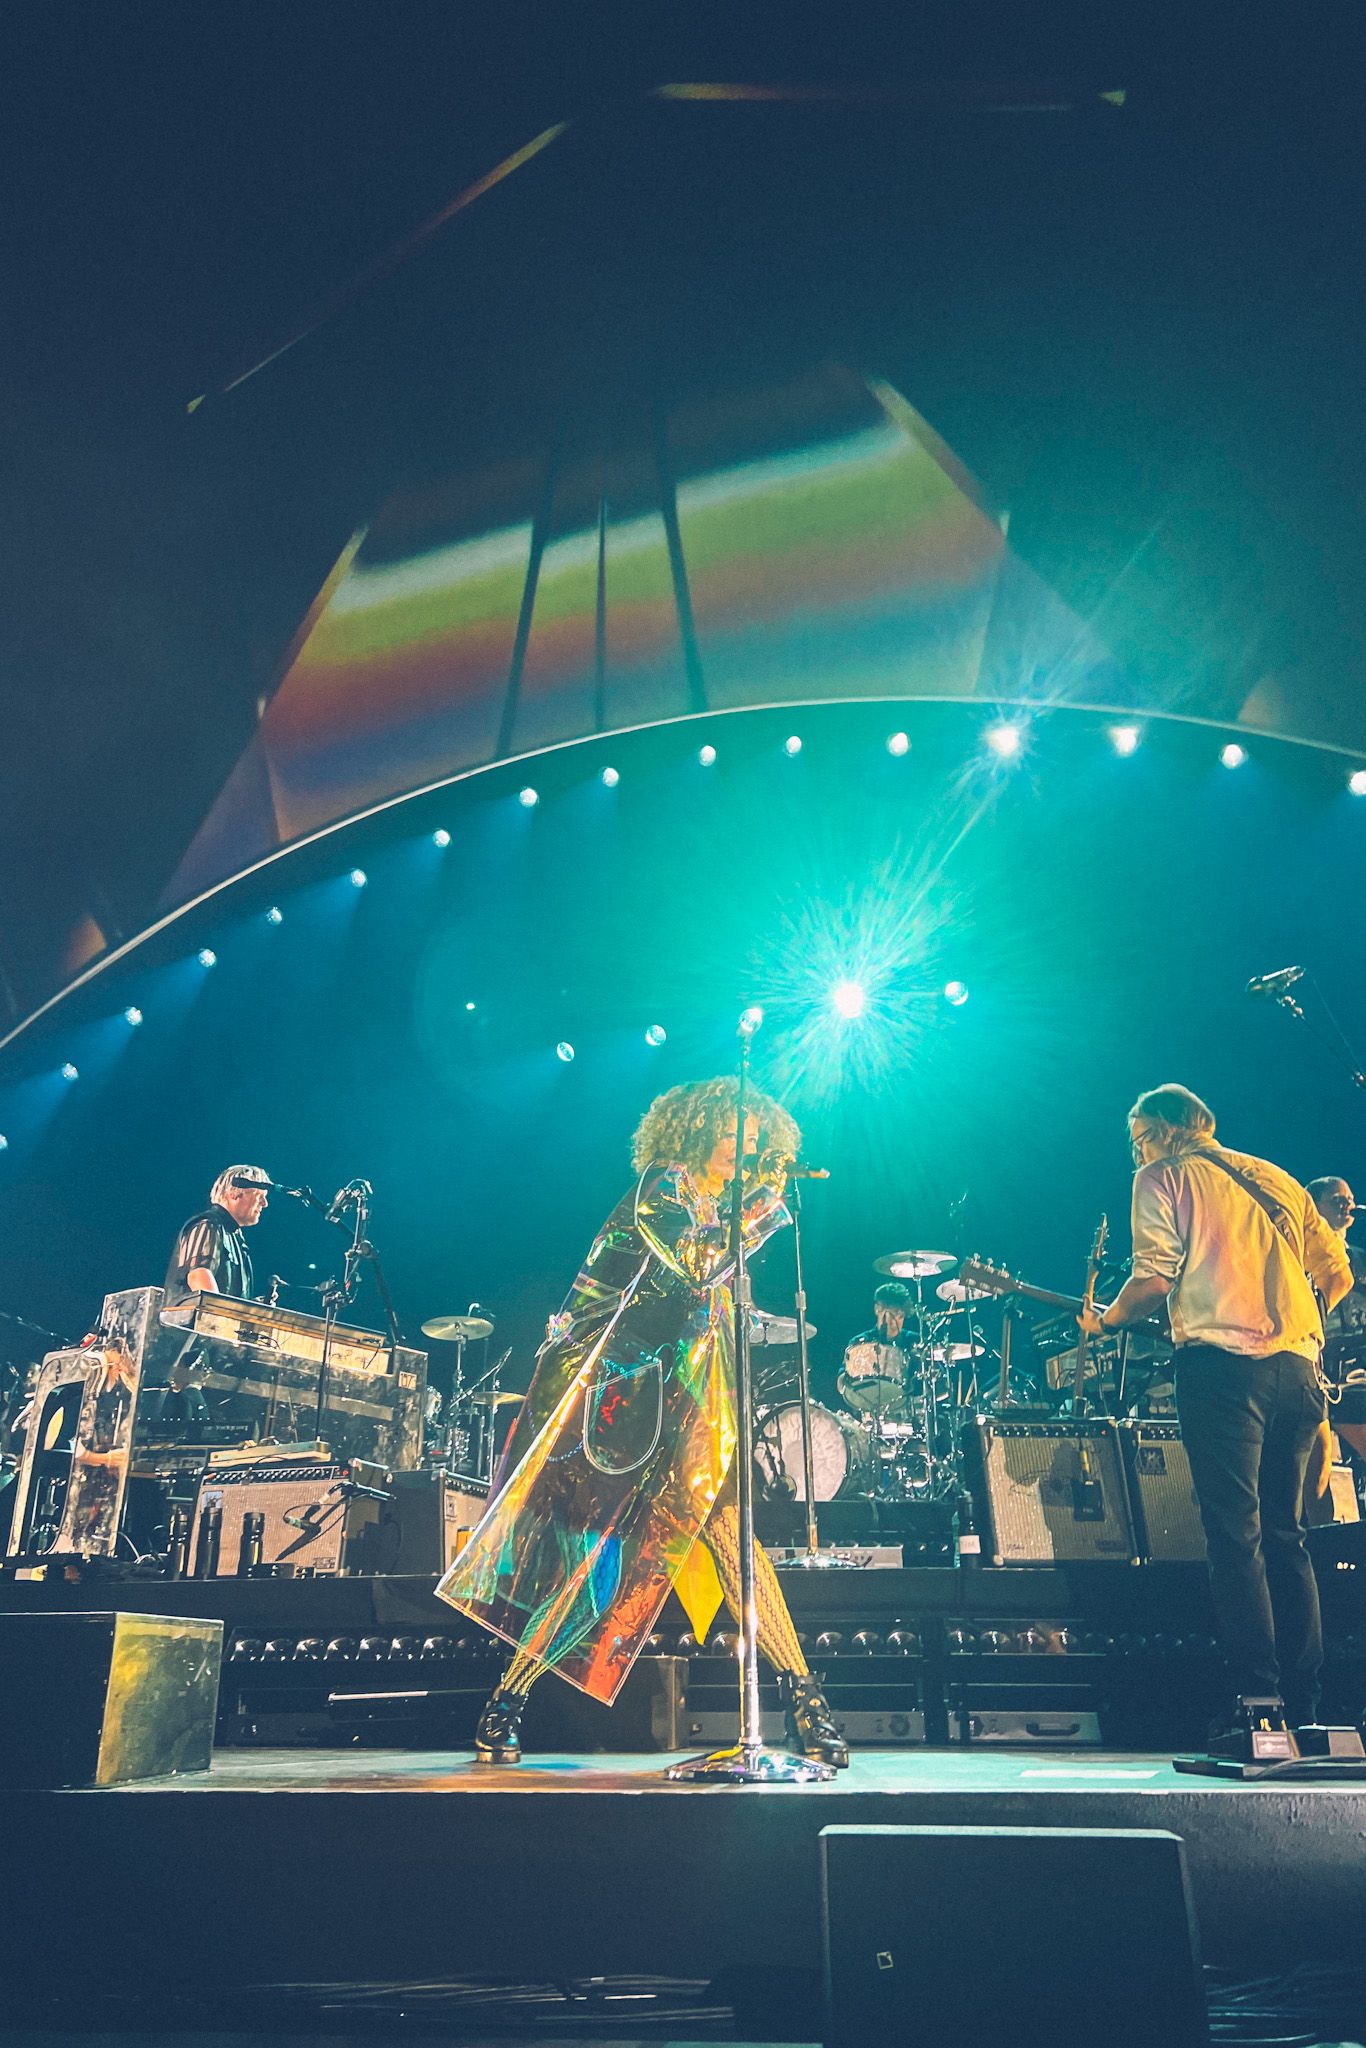 The front woman of the band Arcade Fire struts across a stage wearing a reflective rainbow raincoat, the band in the background alongside blue and rainbow lighting.